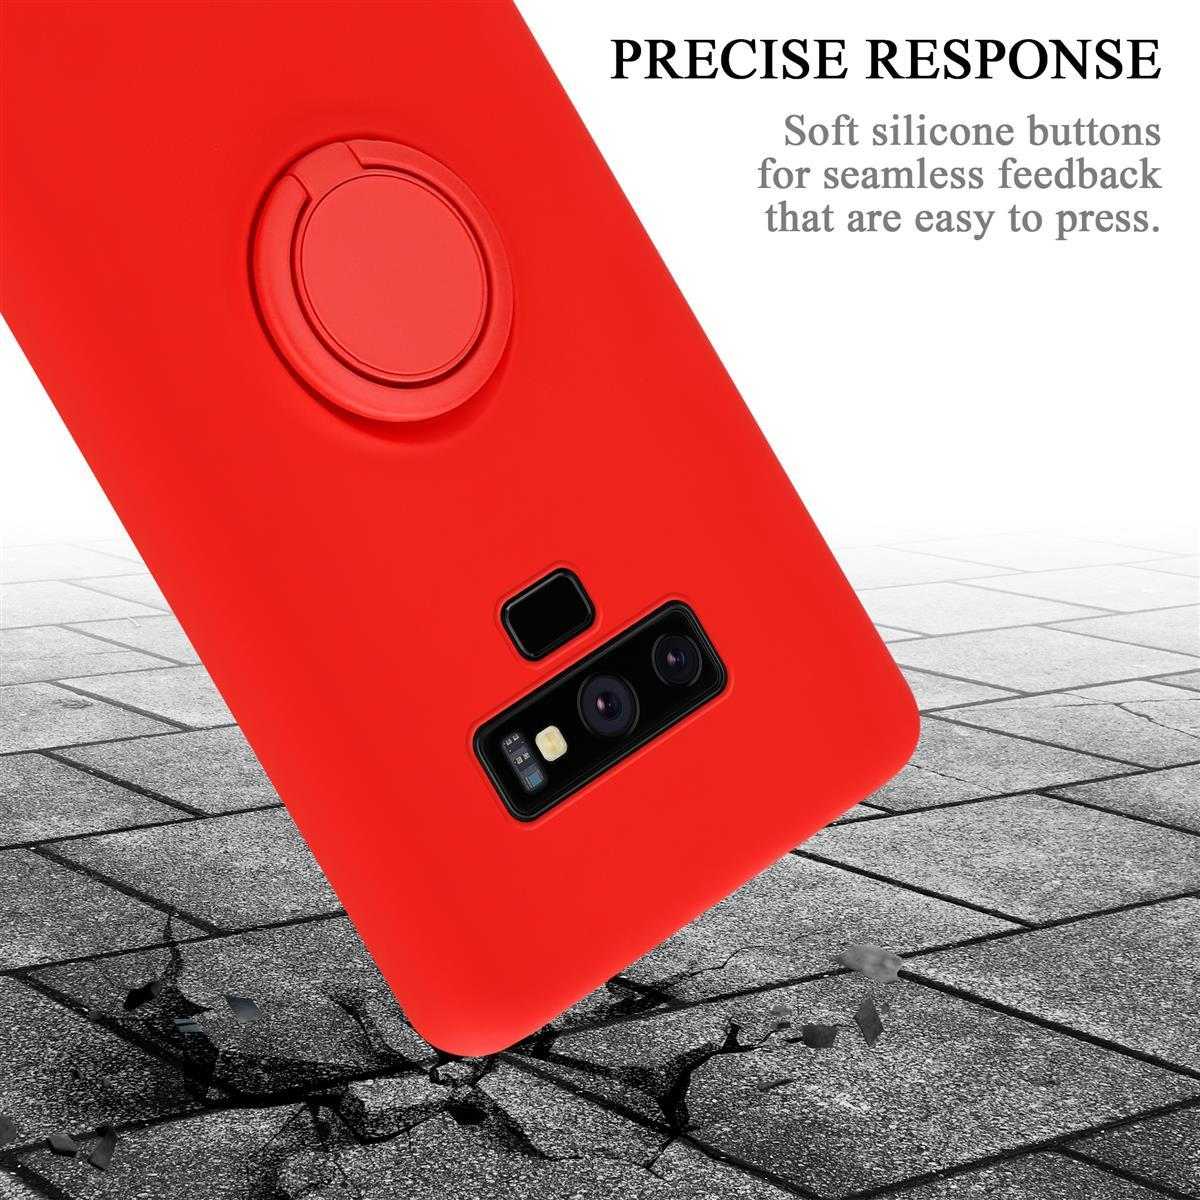 Backcover, Ring 9, Case NOTE Silicone im LIQUID Samsung, Style, Liquid Galaxy Hülle CADORABO ROT